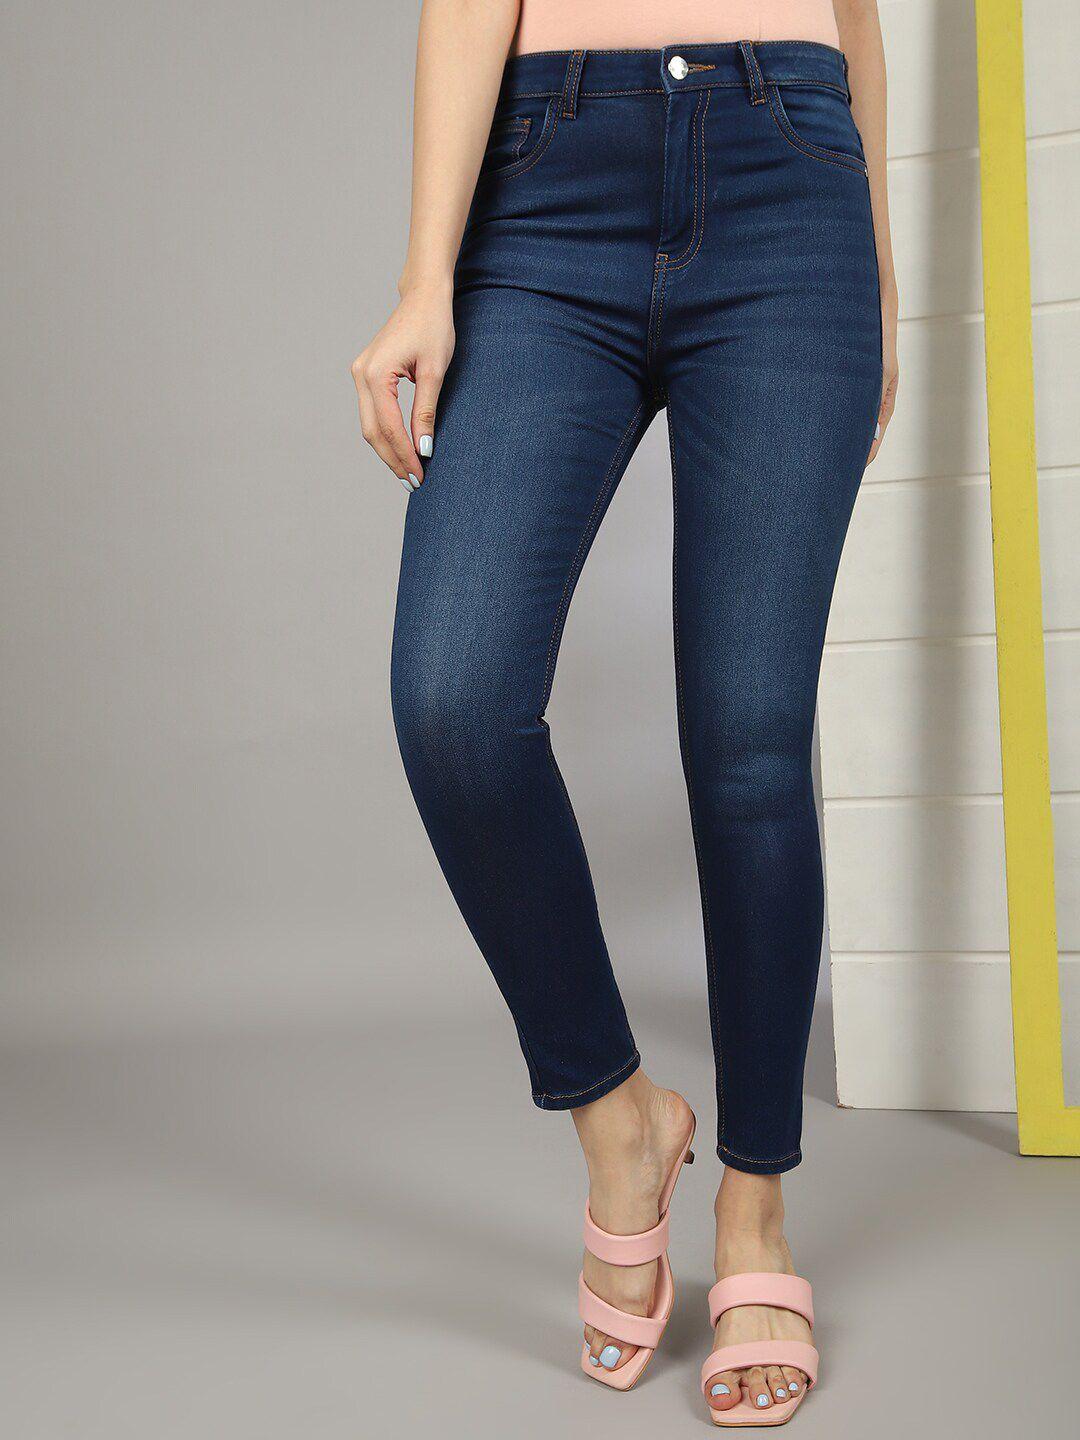 freehand women slim fit high-rise light fade cotton jeans